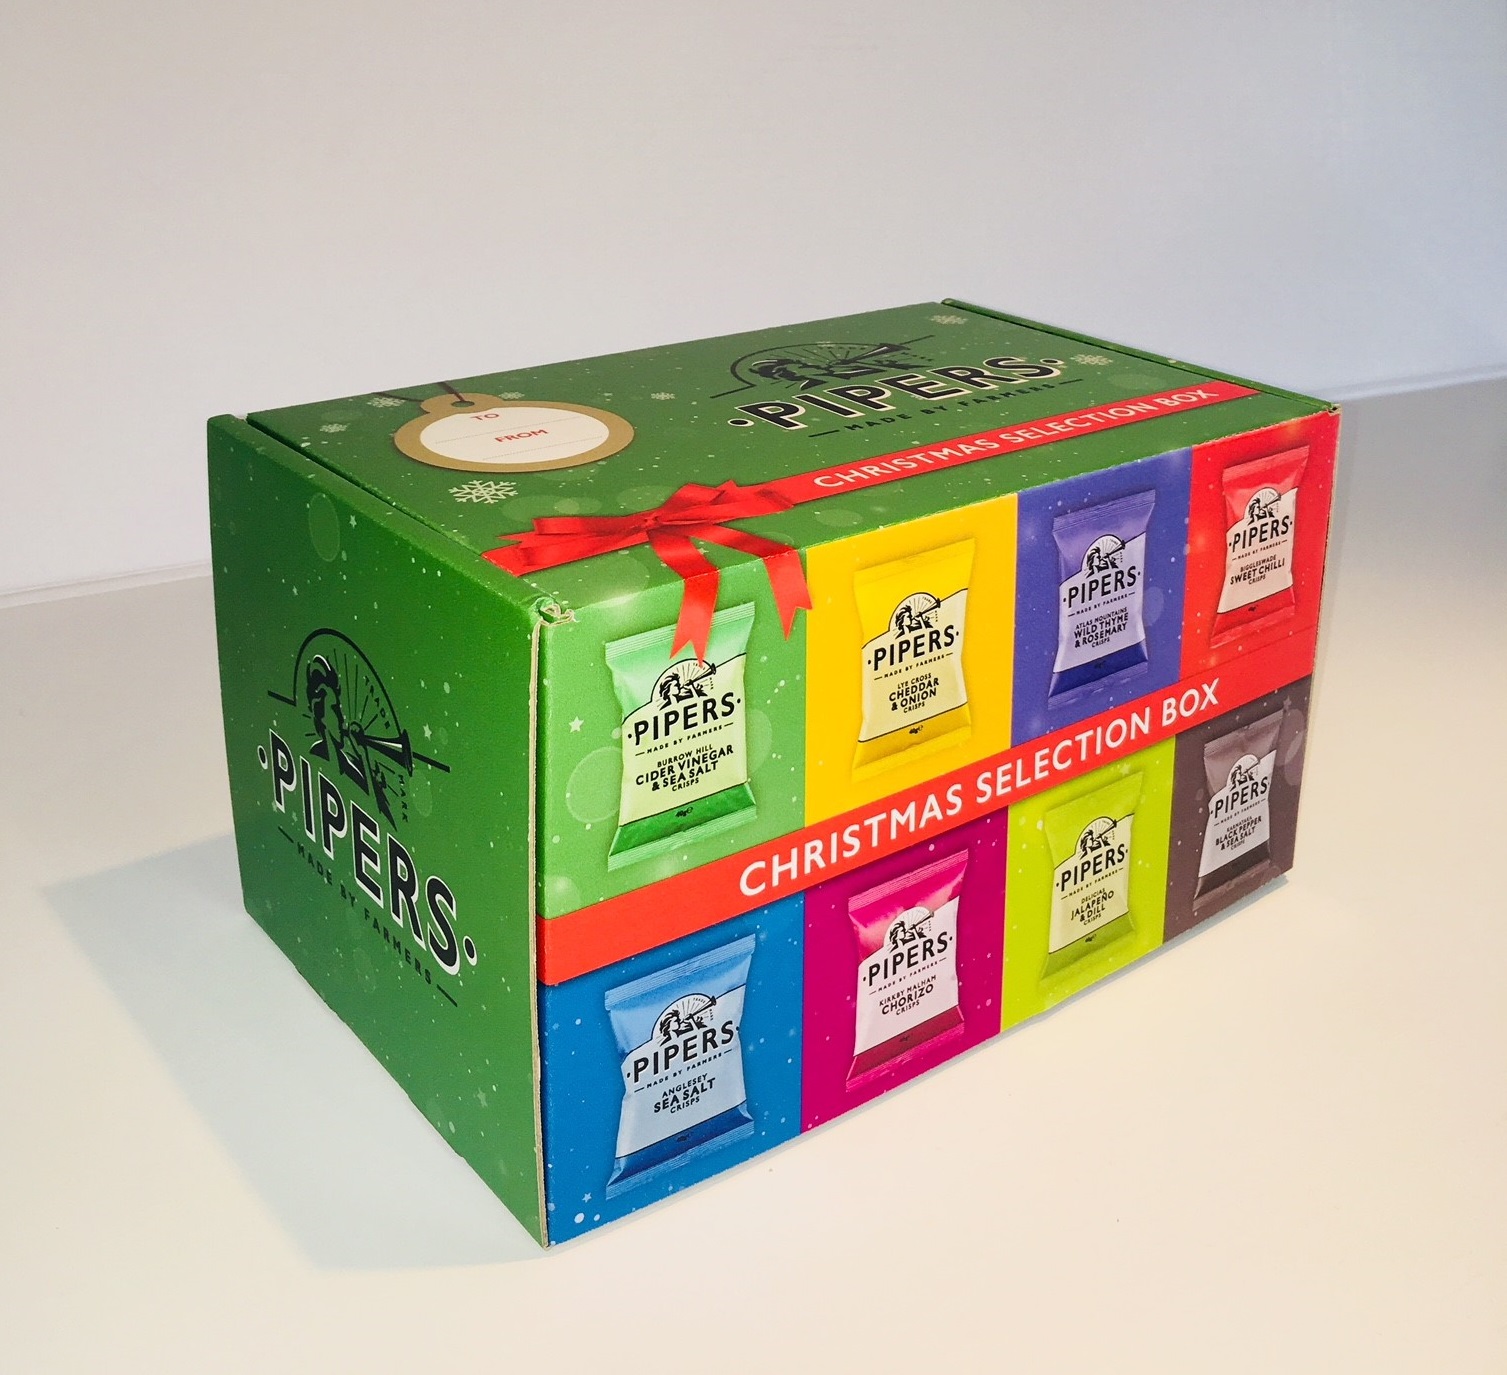 Christmas Selection Box for the Pipers Crisps